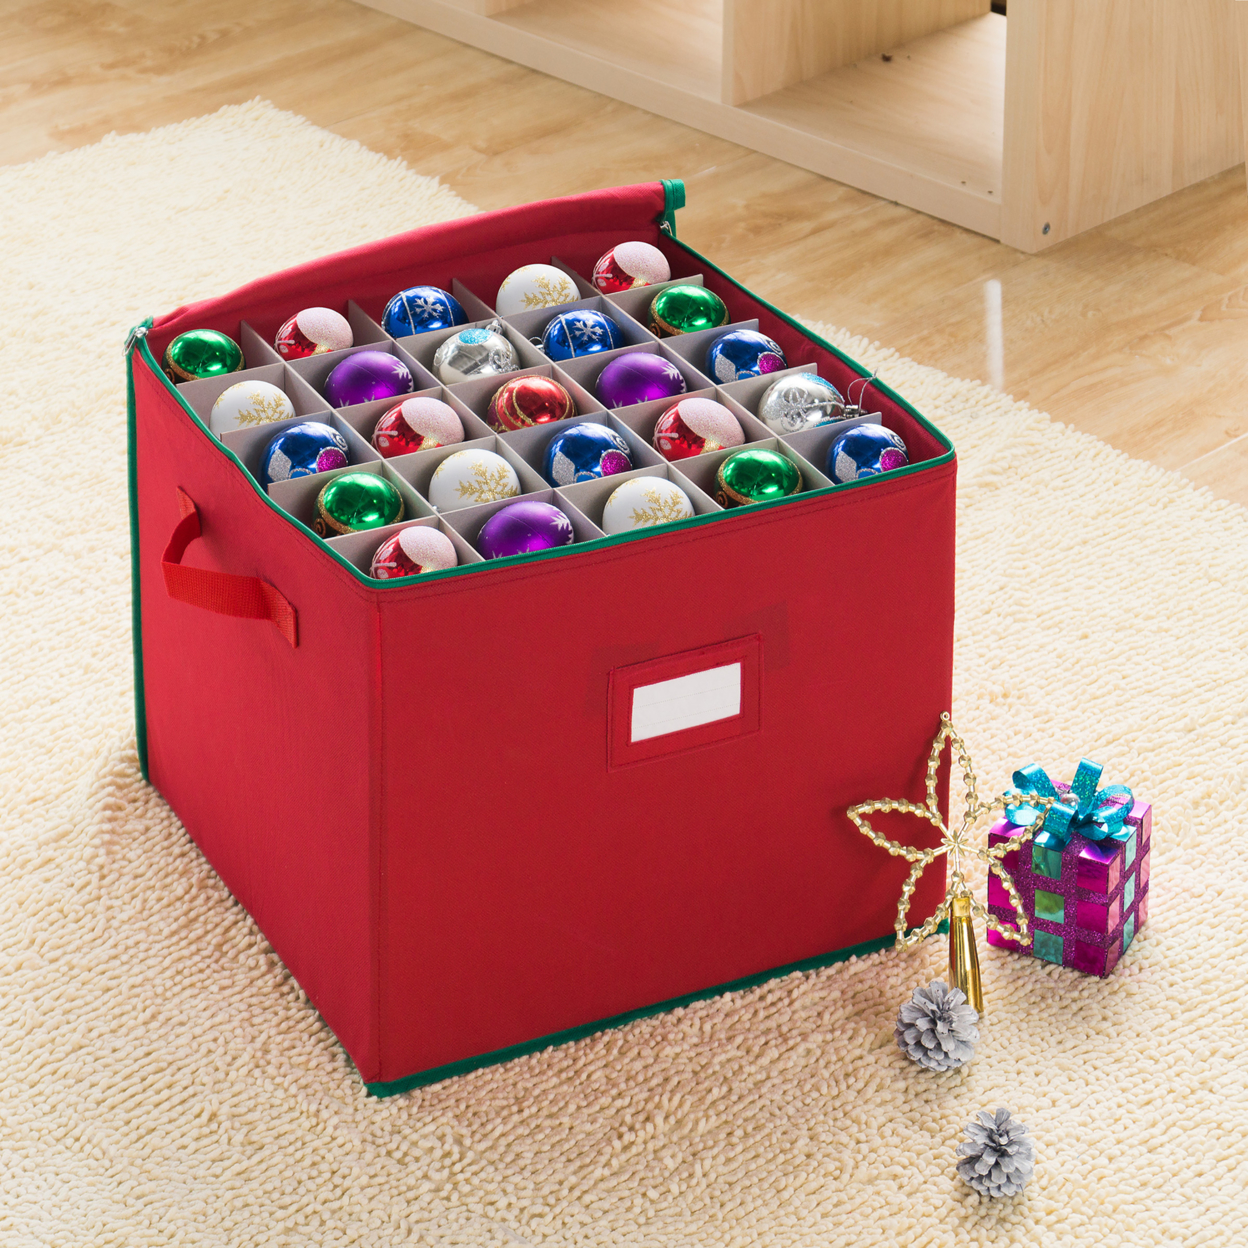 Tiny Tim Totes Christmas Ornament Storage Chest Holds 75 Balls W/Dividers Red